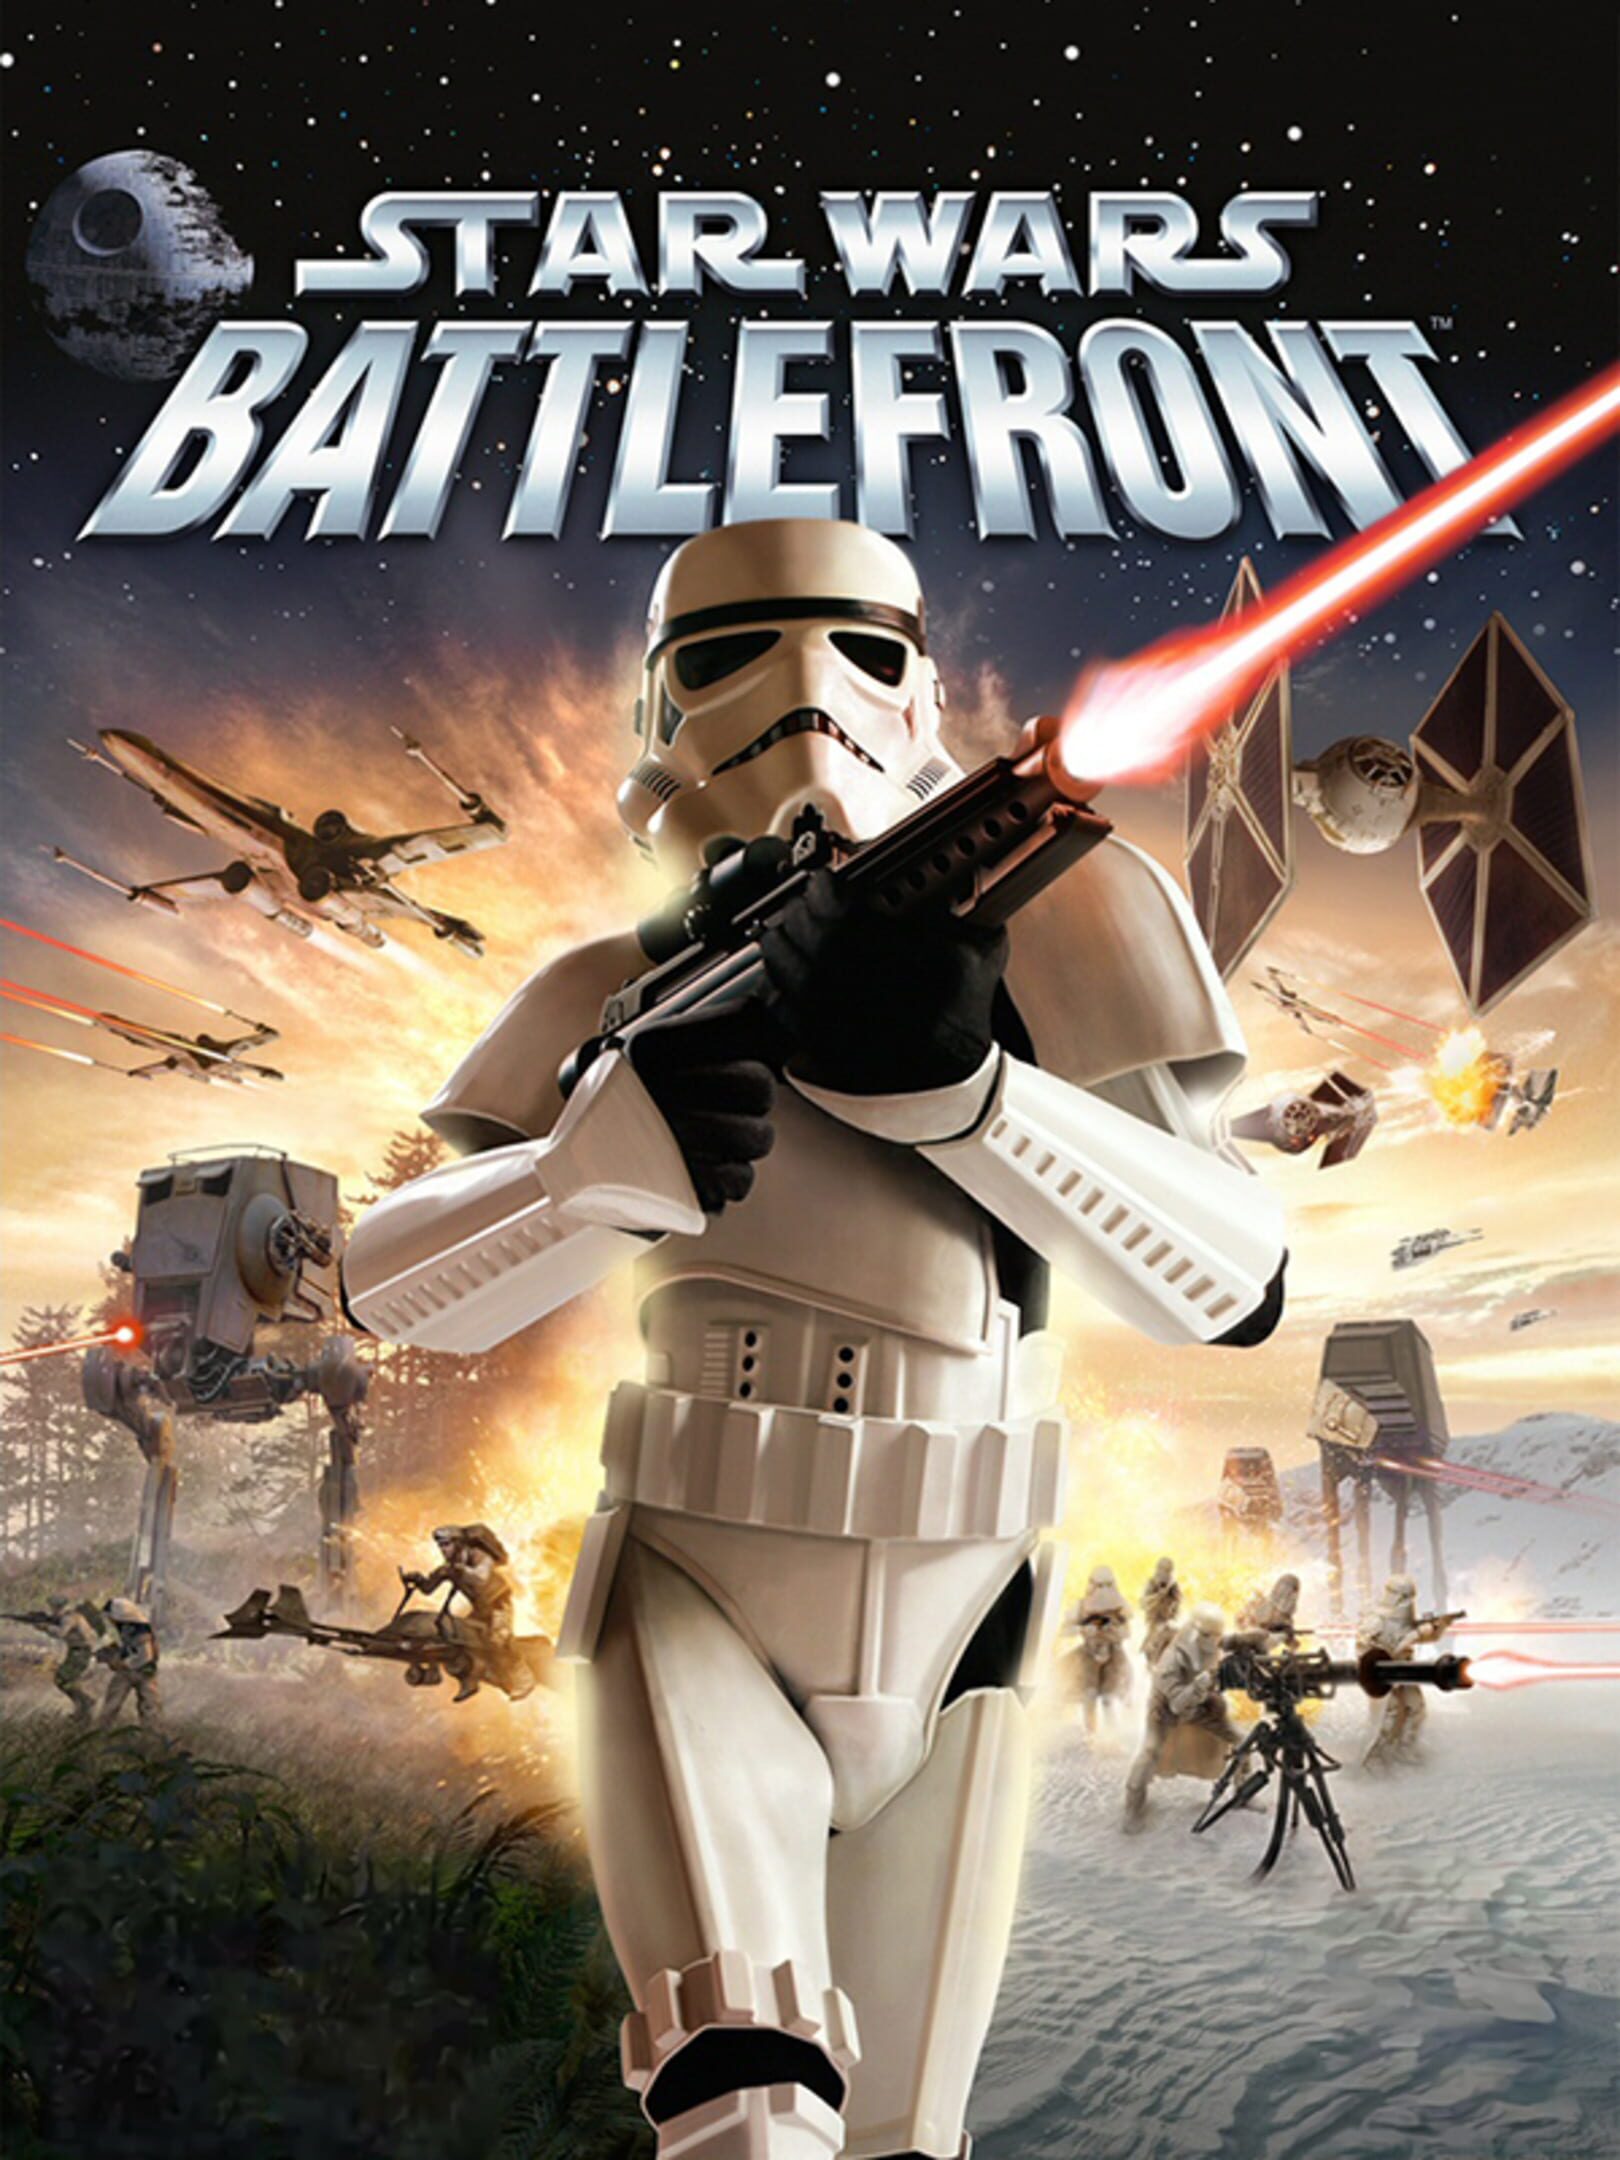 Star wars battlefront classic collection nintendo. Star Wars Battlefront (Classic, 2004). Star Wars Battlefront 2 игра. Star Wars Battlefront 2 2005 обложка. Батлфронт 2 диск.